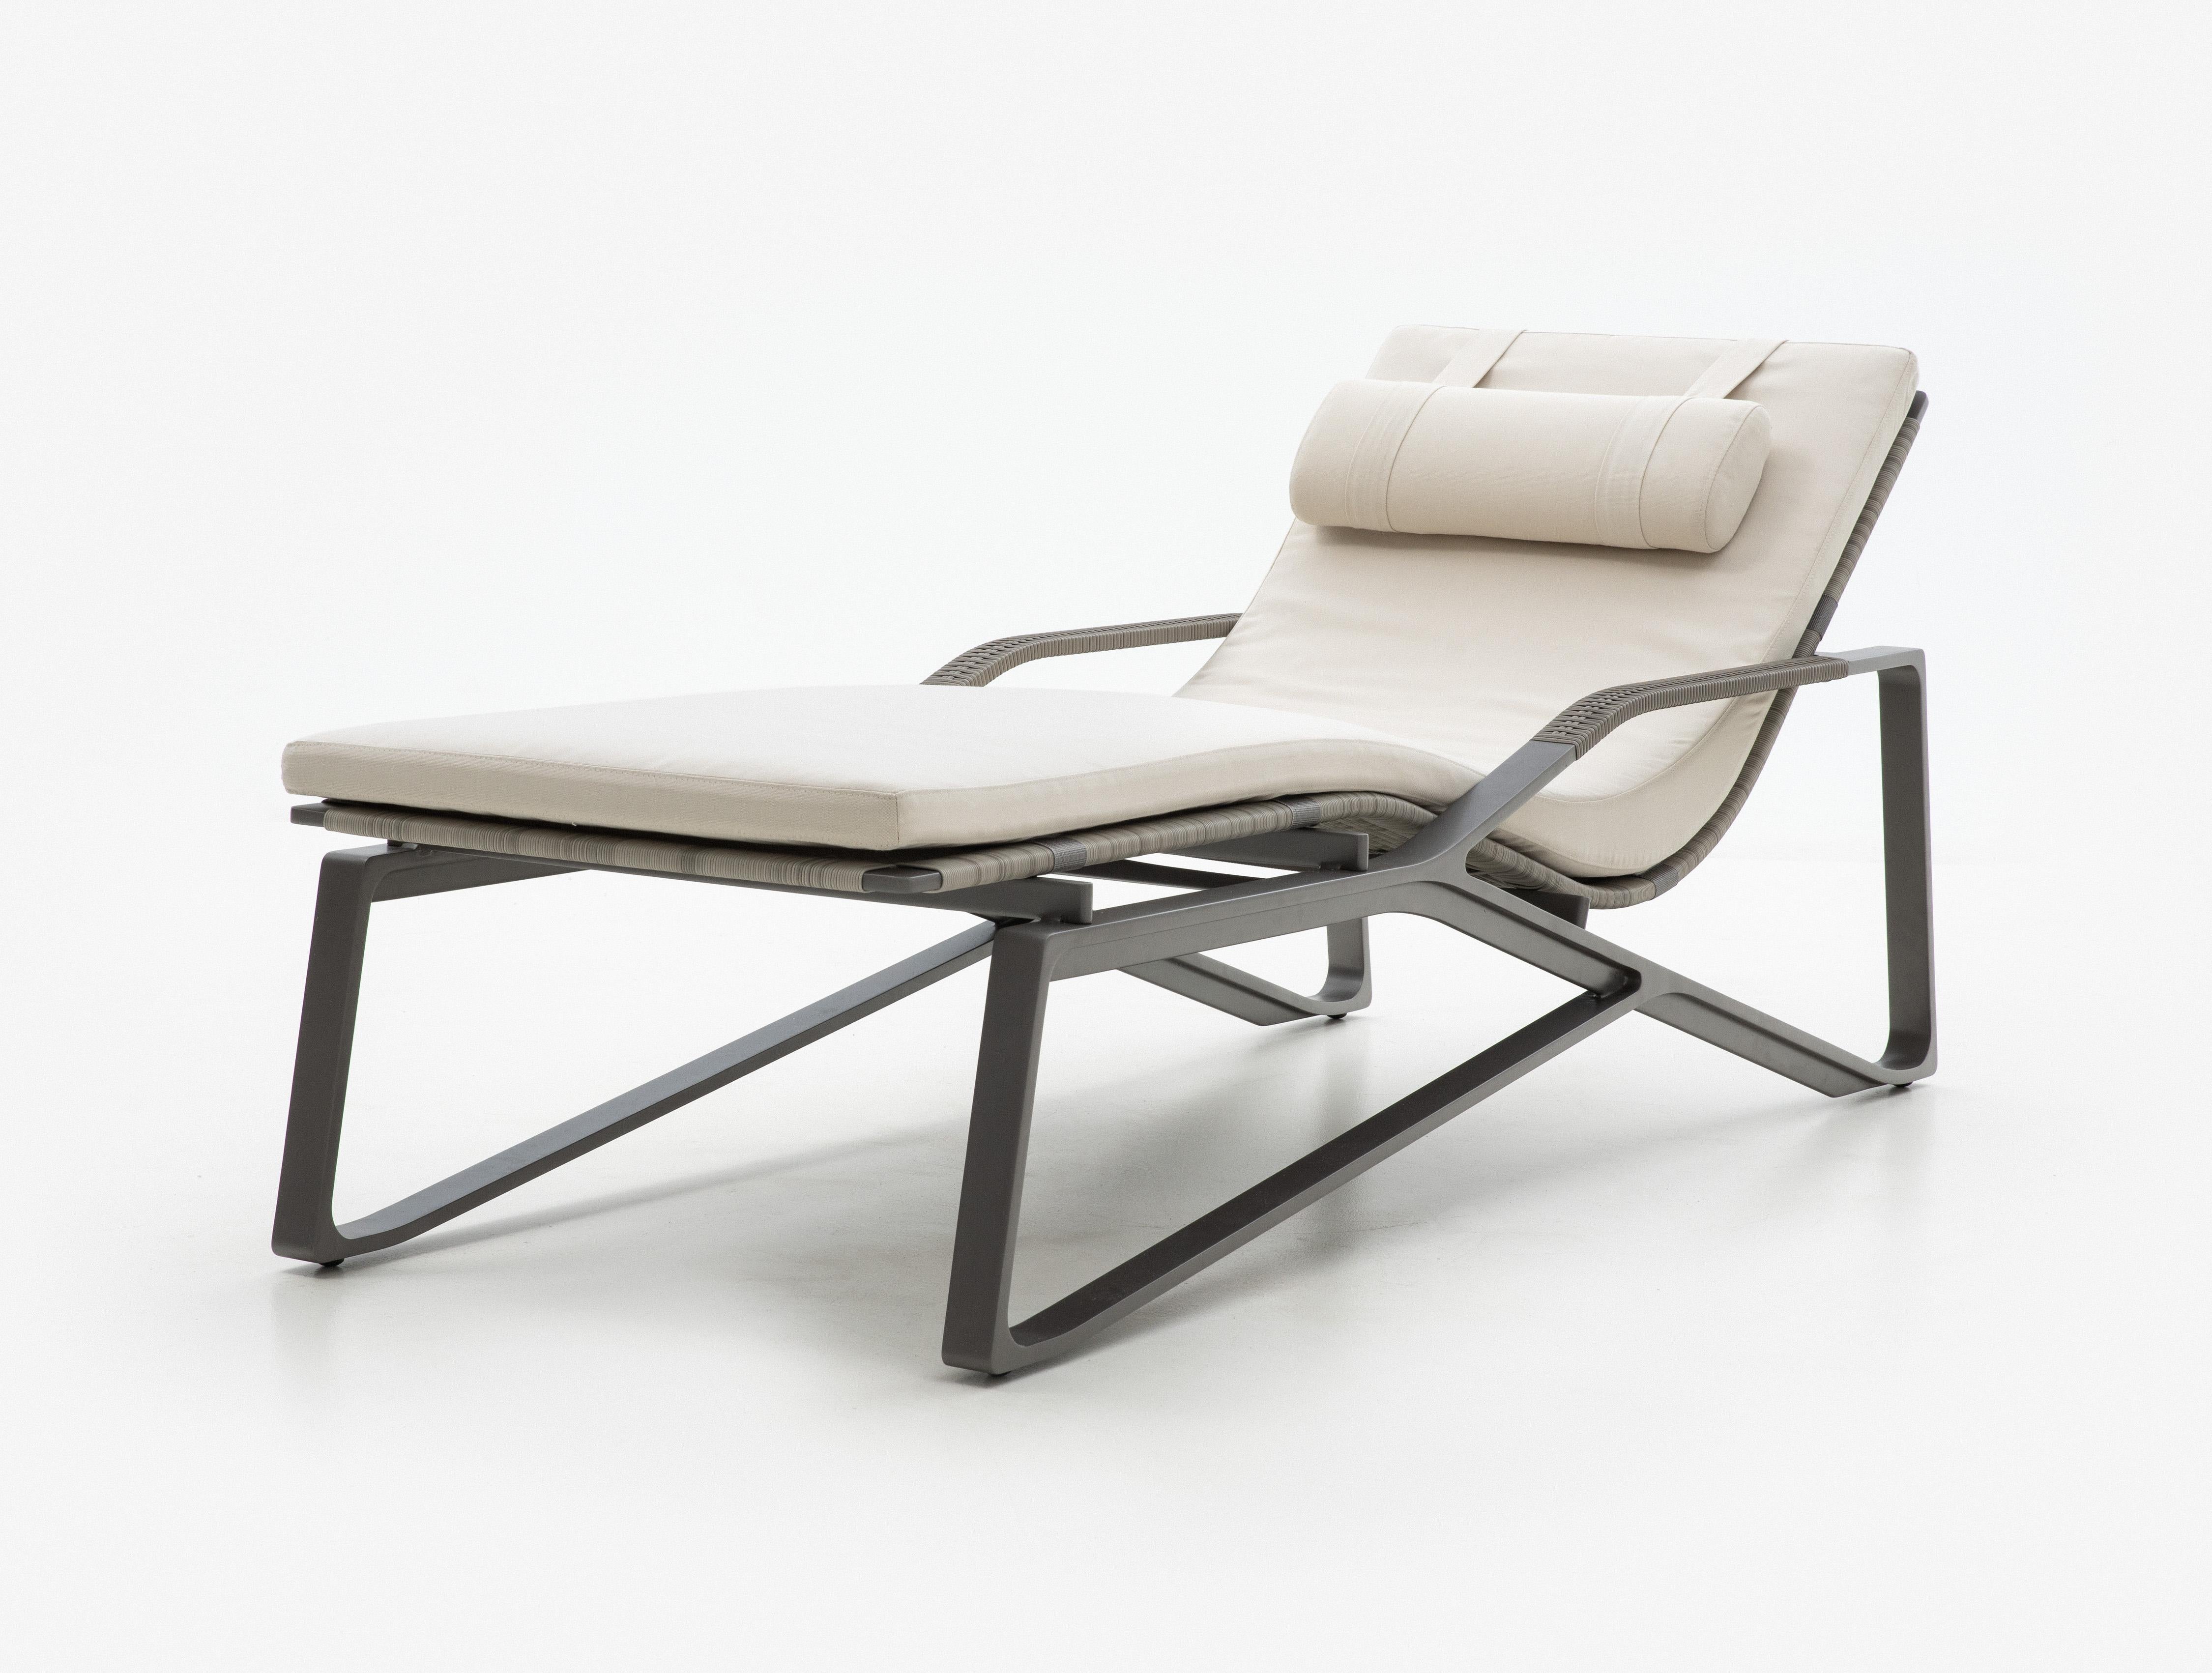 American HOLLY HUNT Outdoor Moray Chaise with Oyster Base Finish and Sand Color Canvas